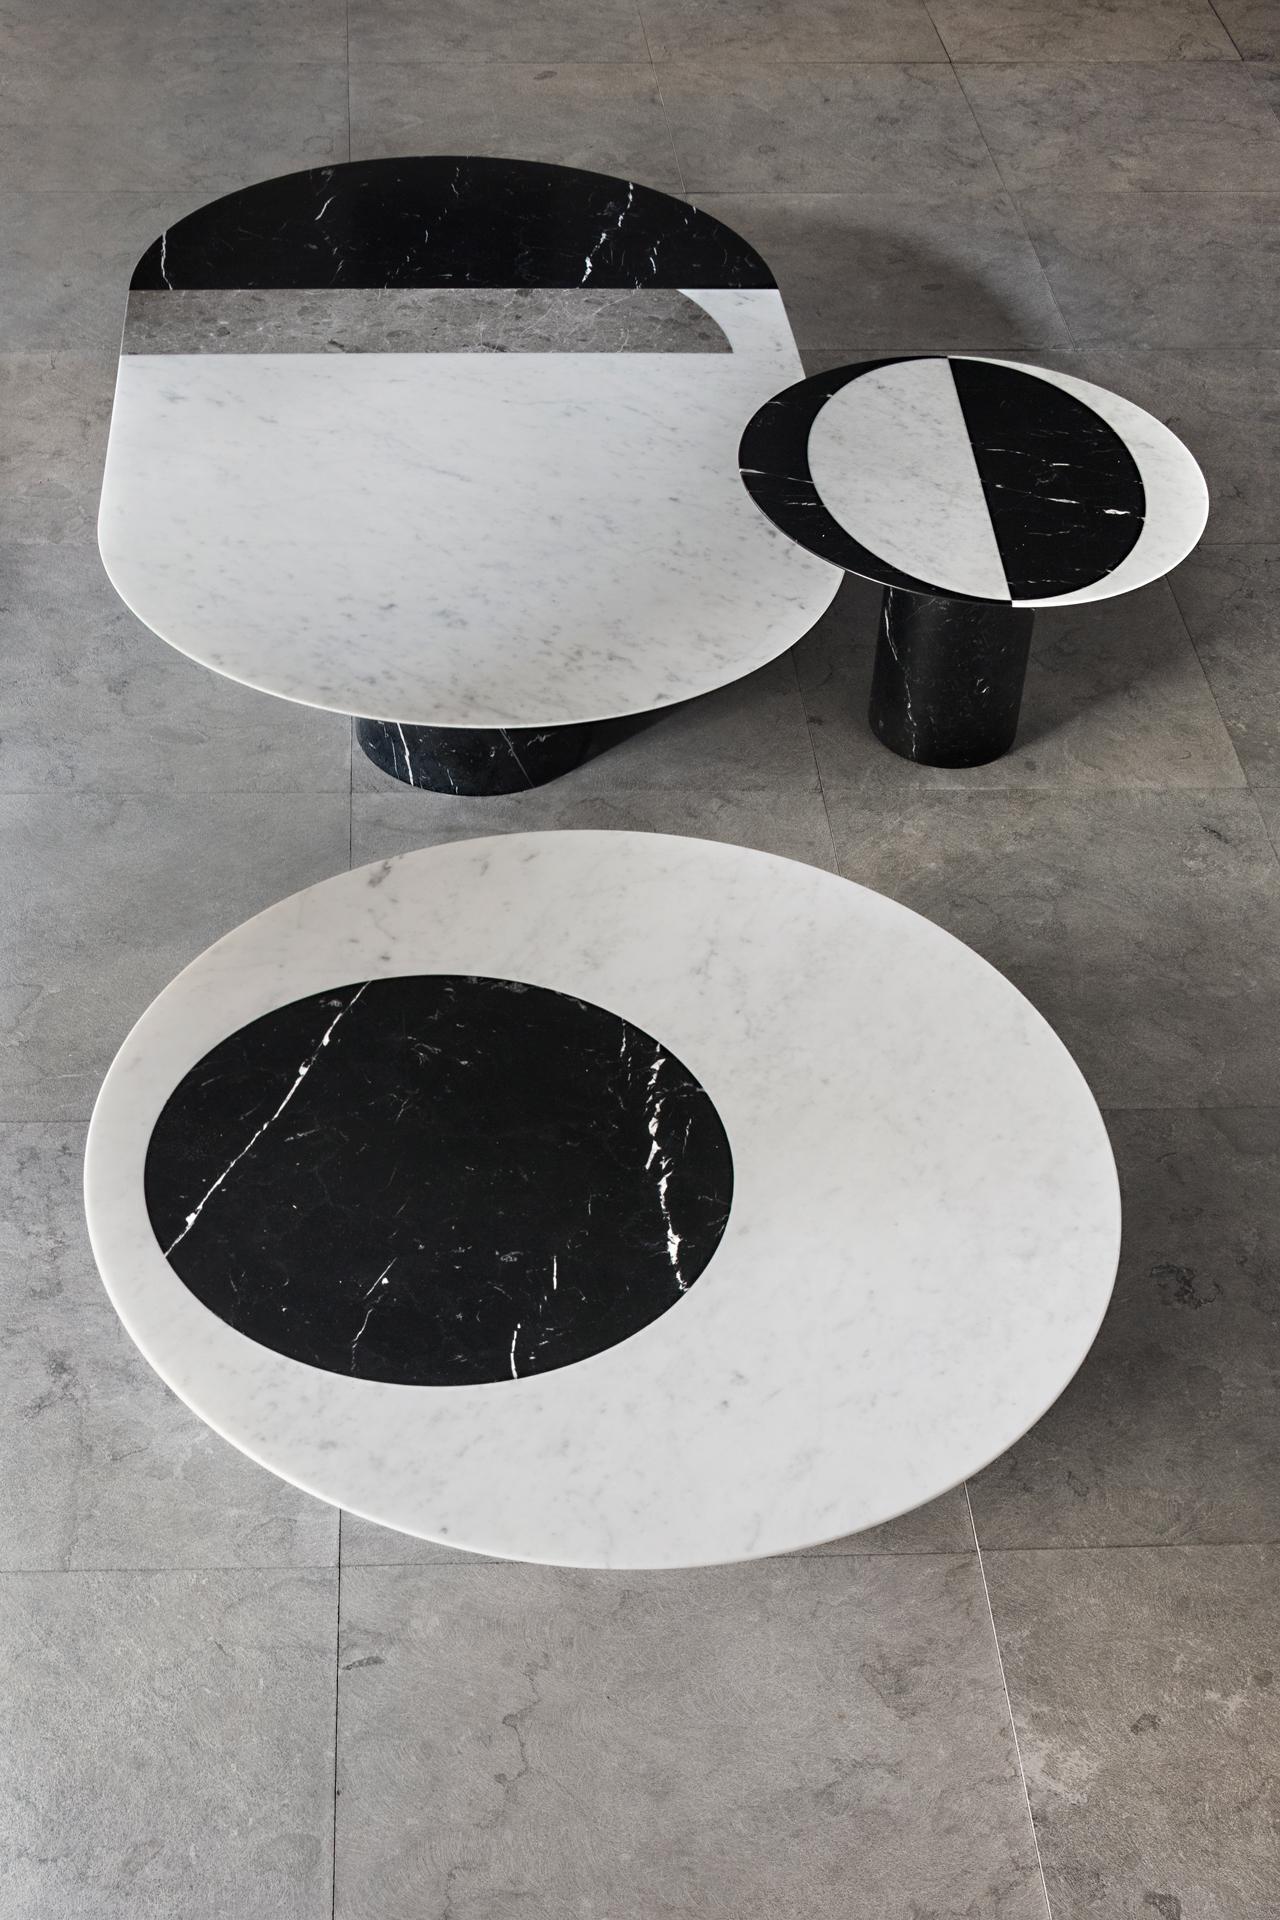 A series of coffee and dining table designed by Elisa Ossino for Salvatori, the ‘Proiezioni’ takes its name from the Italian word for “projections’ and refers to the effect of light on stone. The patterns created by inlaying different shades of